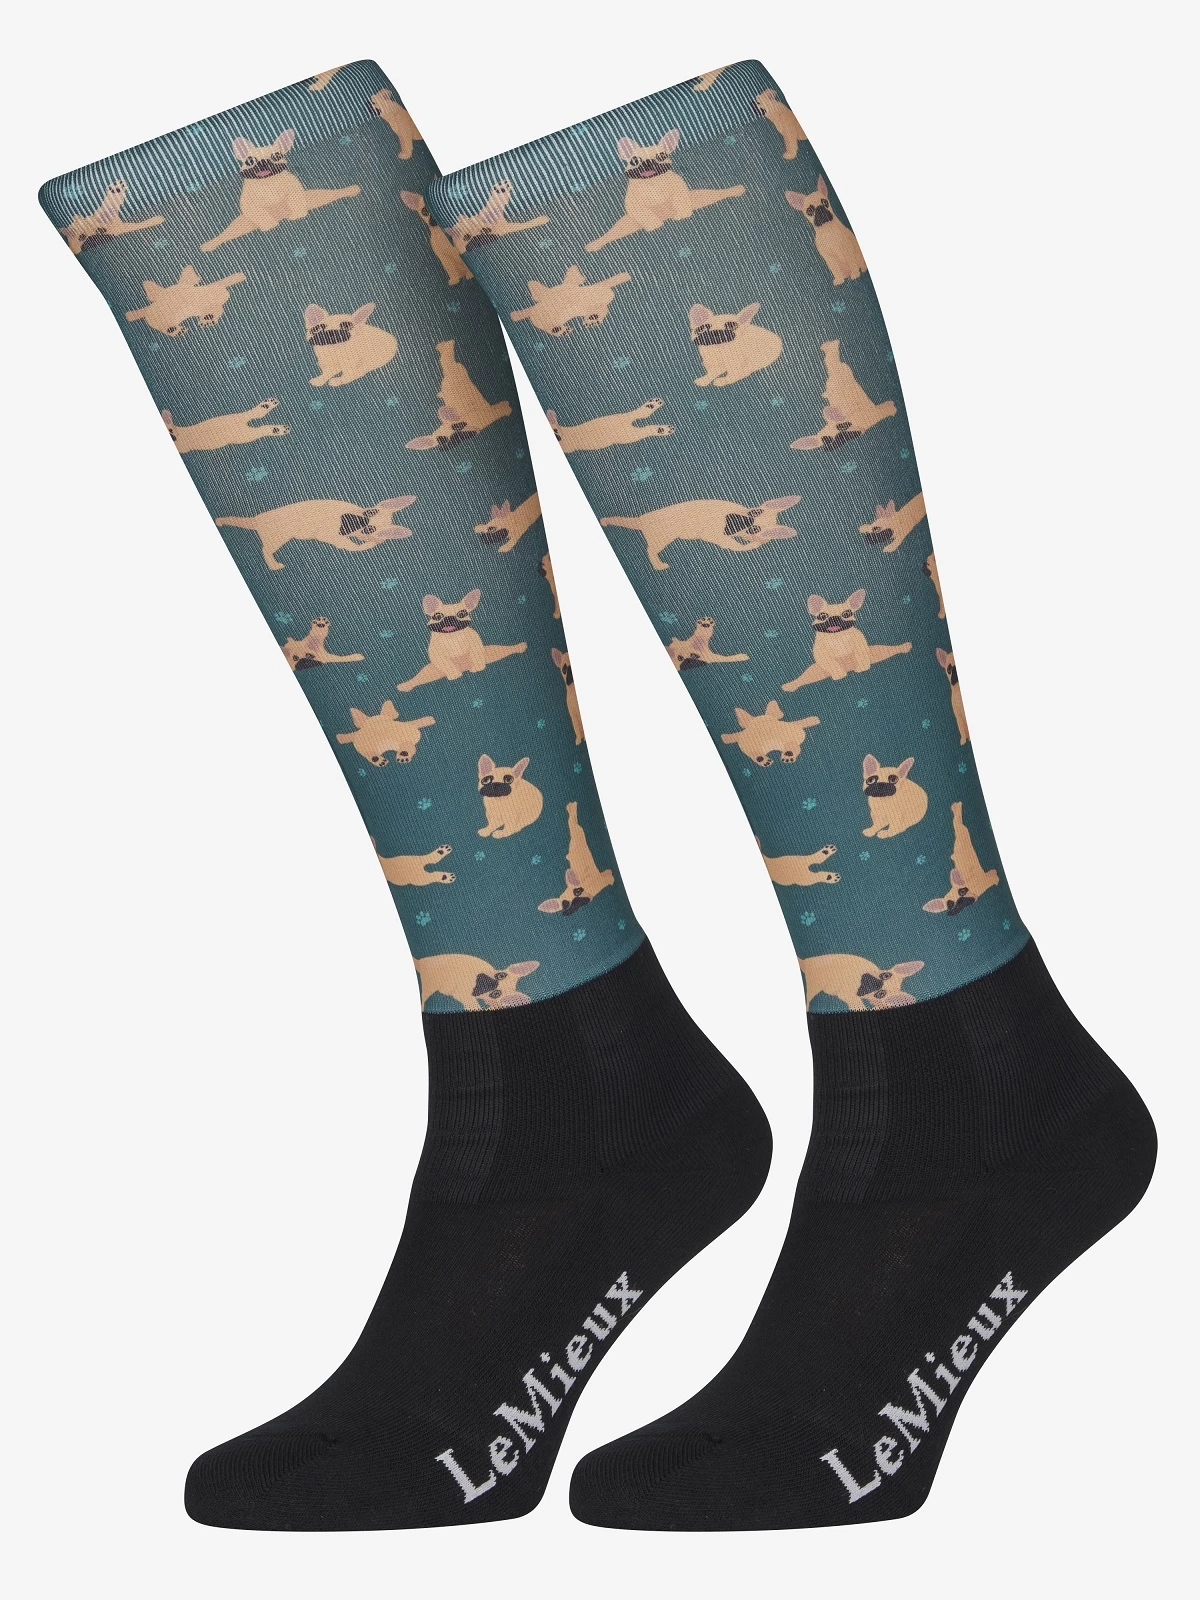 Lemieux Footsie Sock Dogs Adult Size - A Cute Pug Design, Ultrathin with Padd...